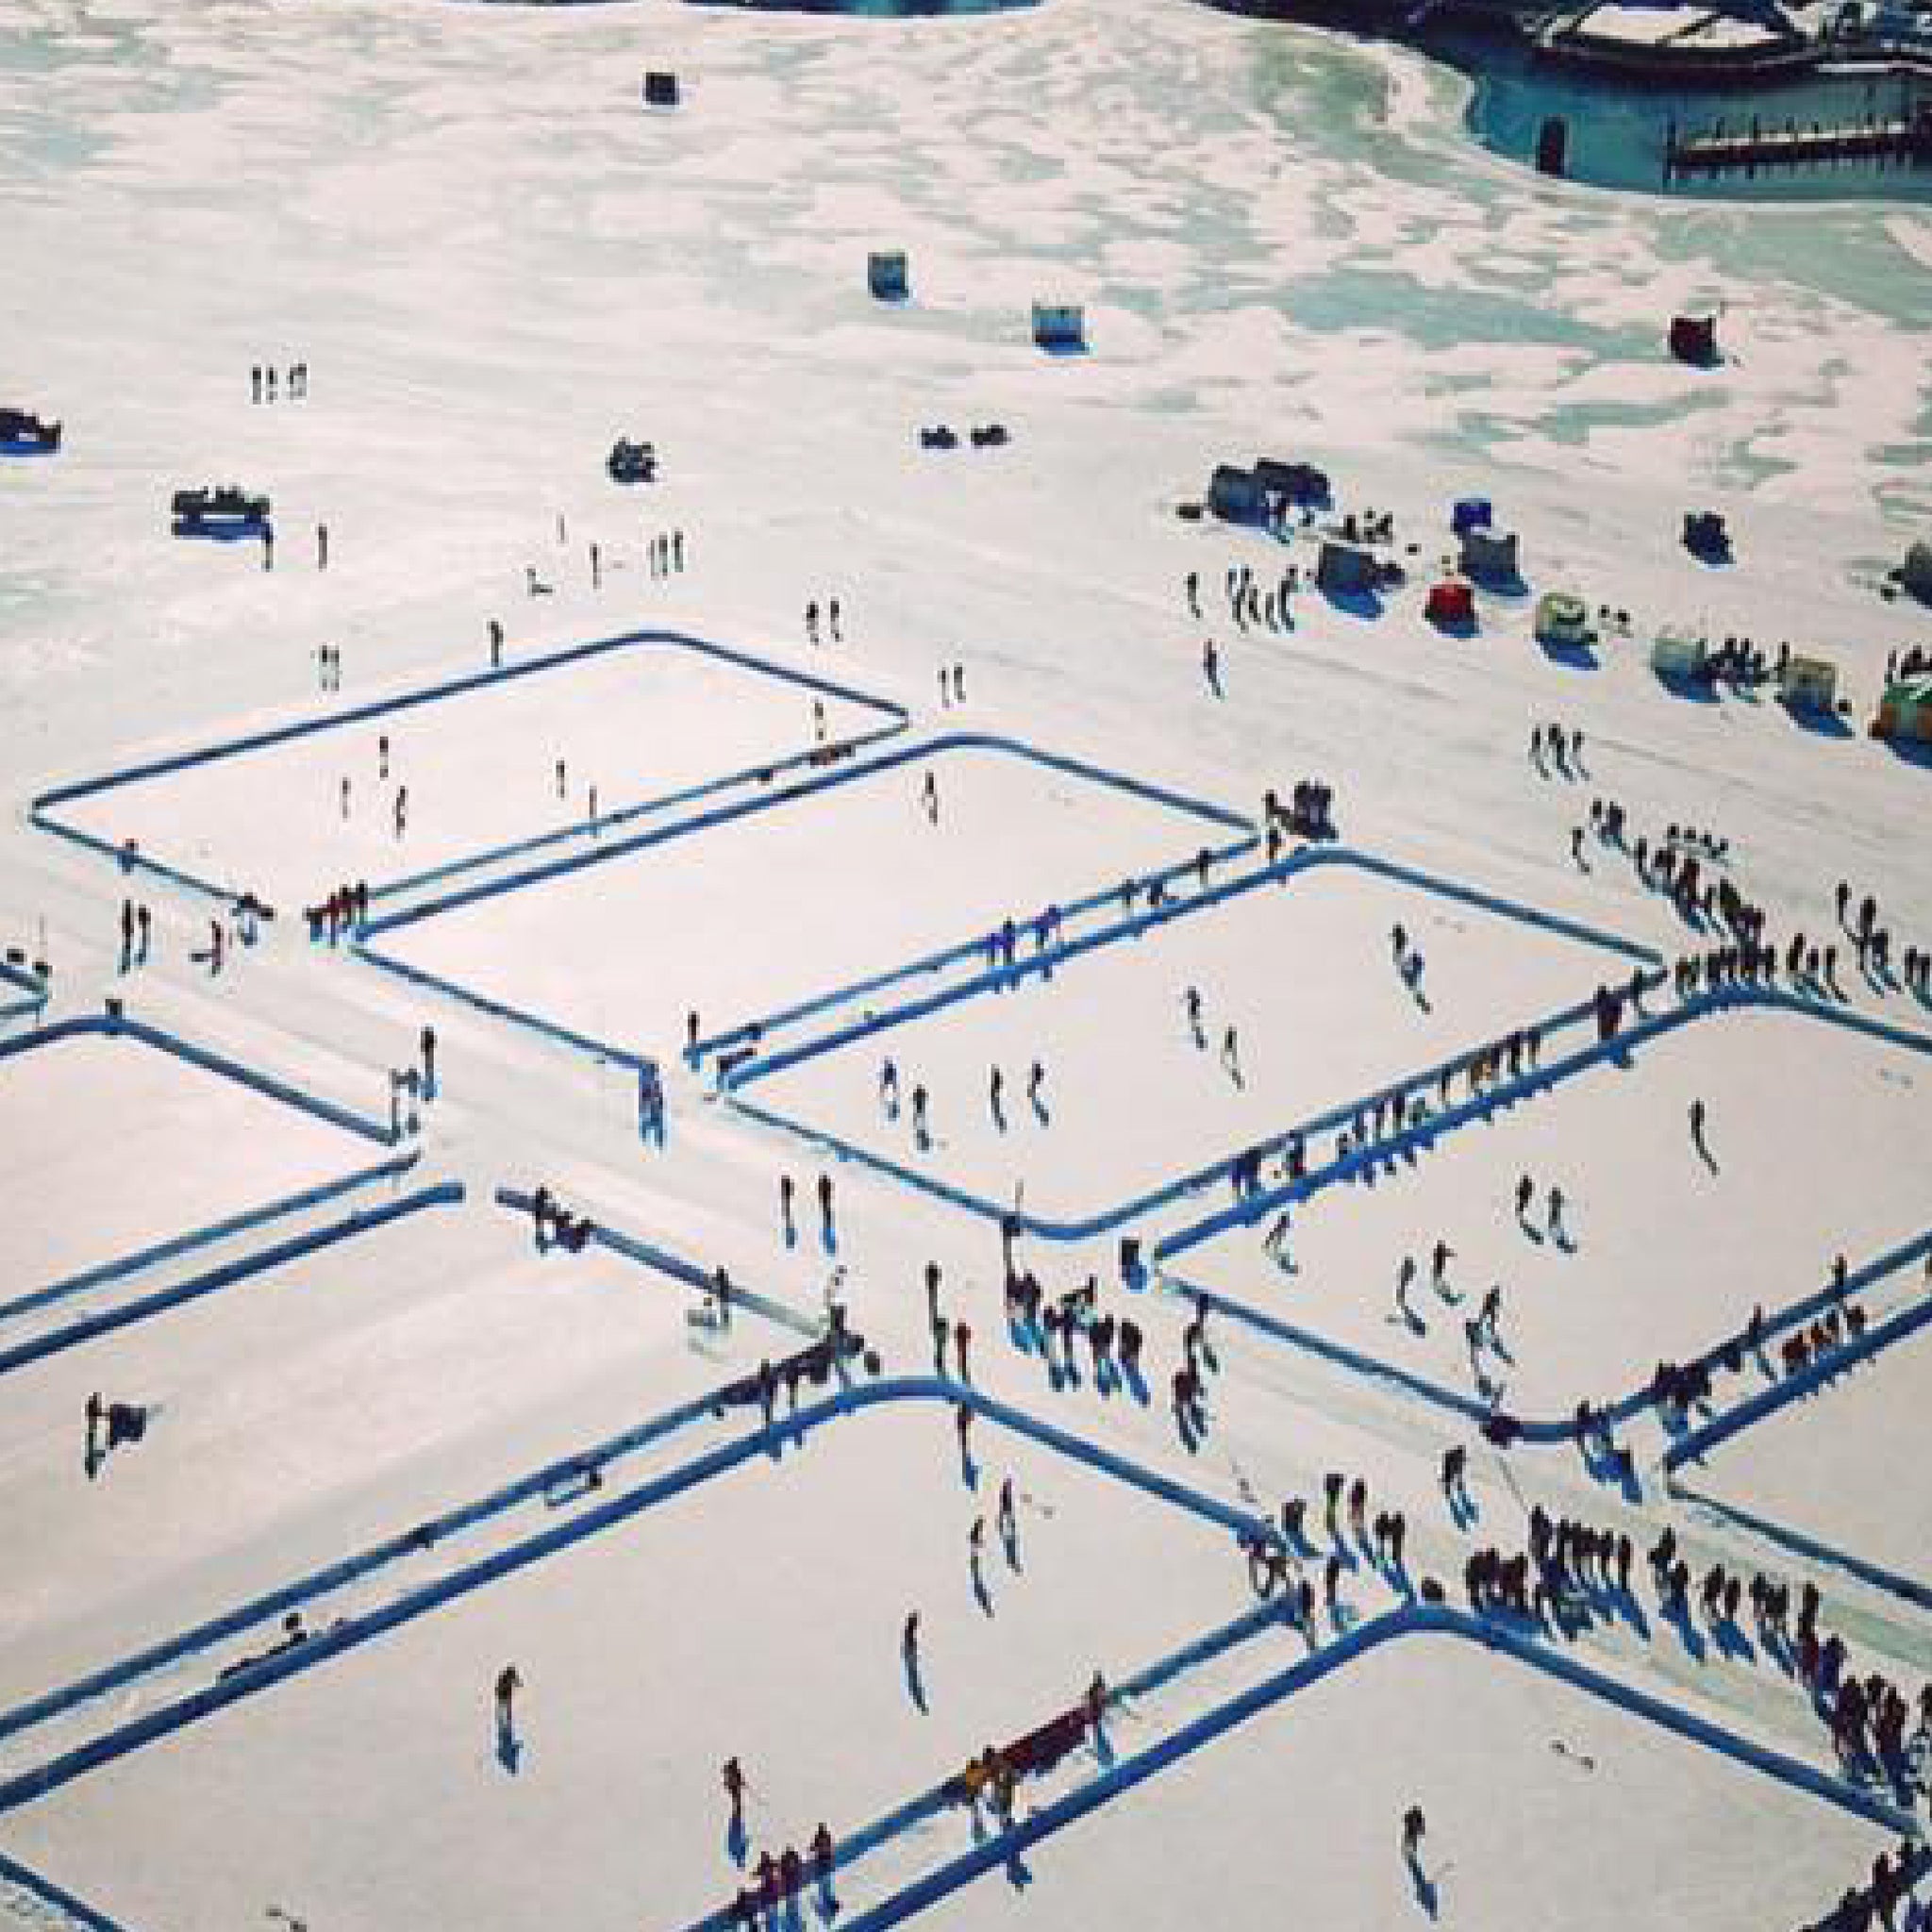 Aerial view of the Labatt Lineup event.